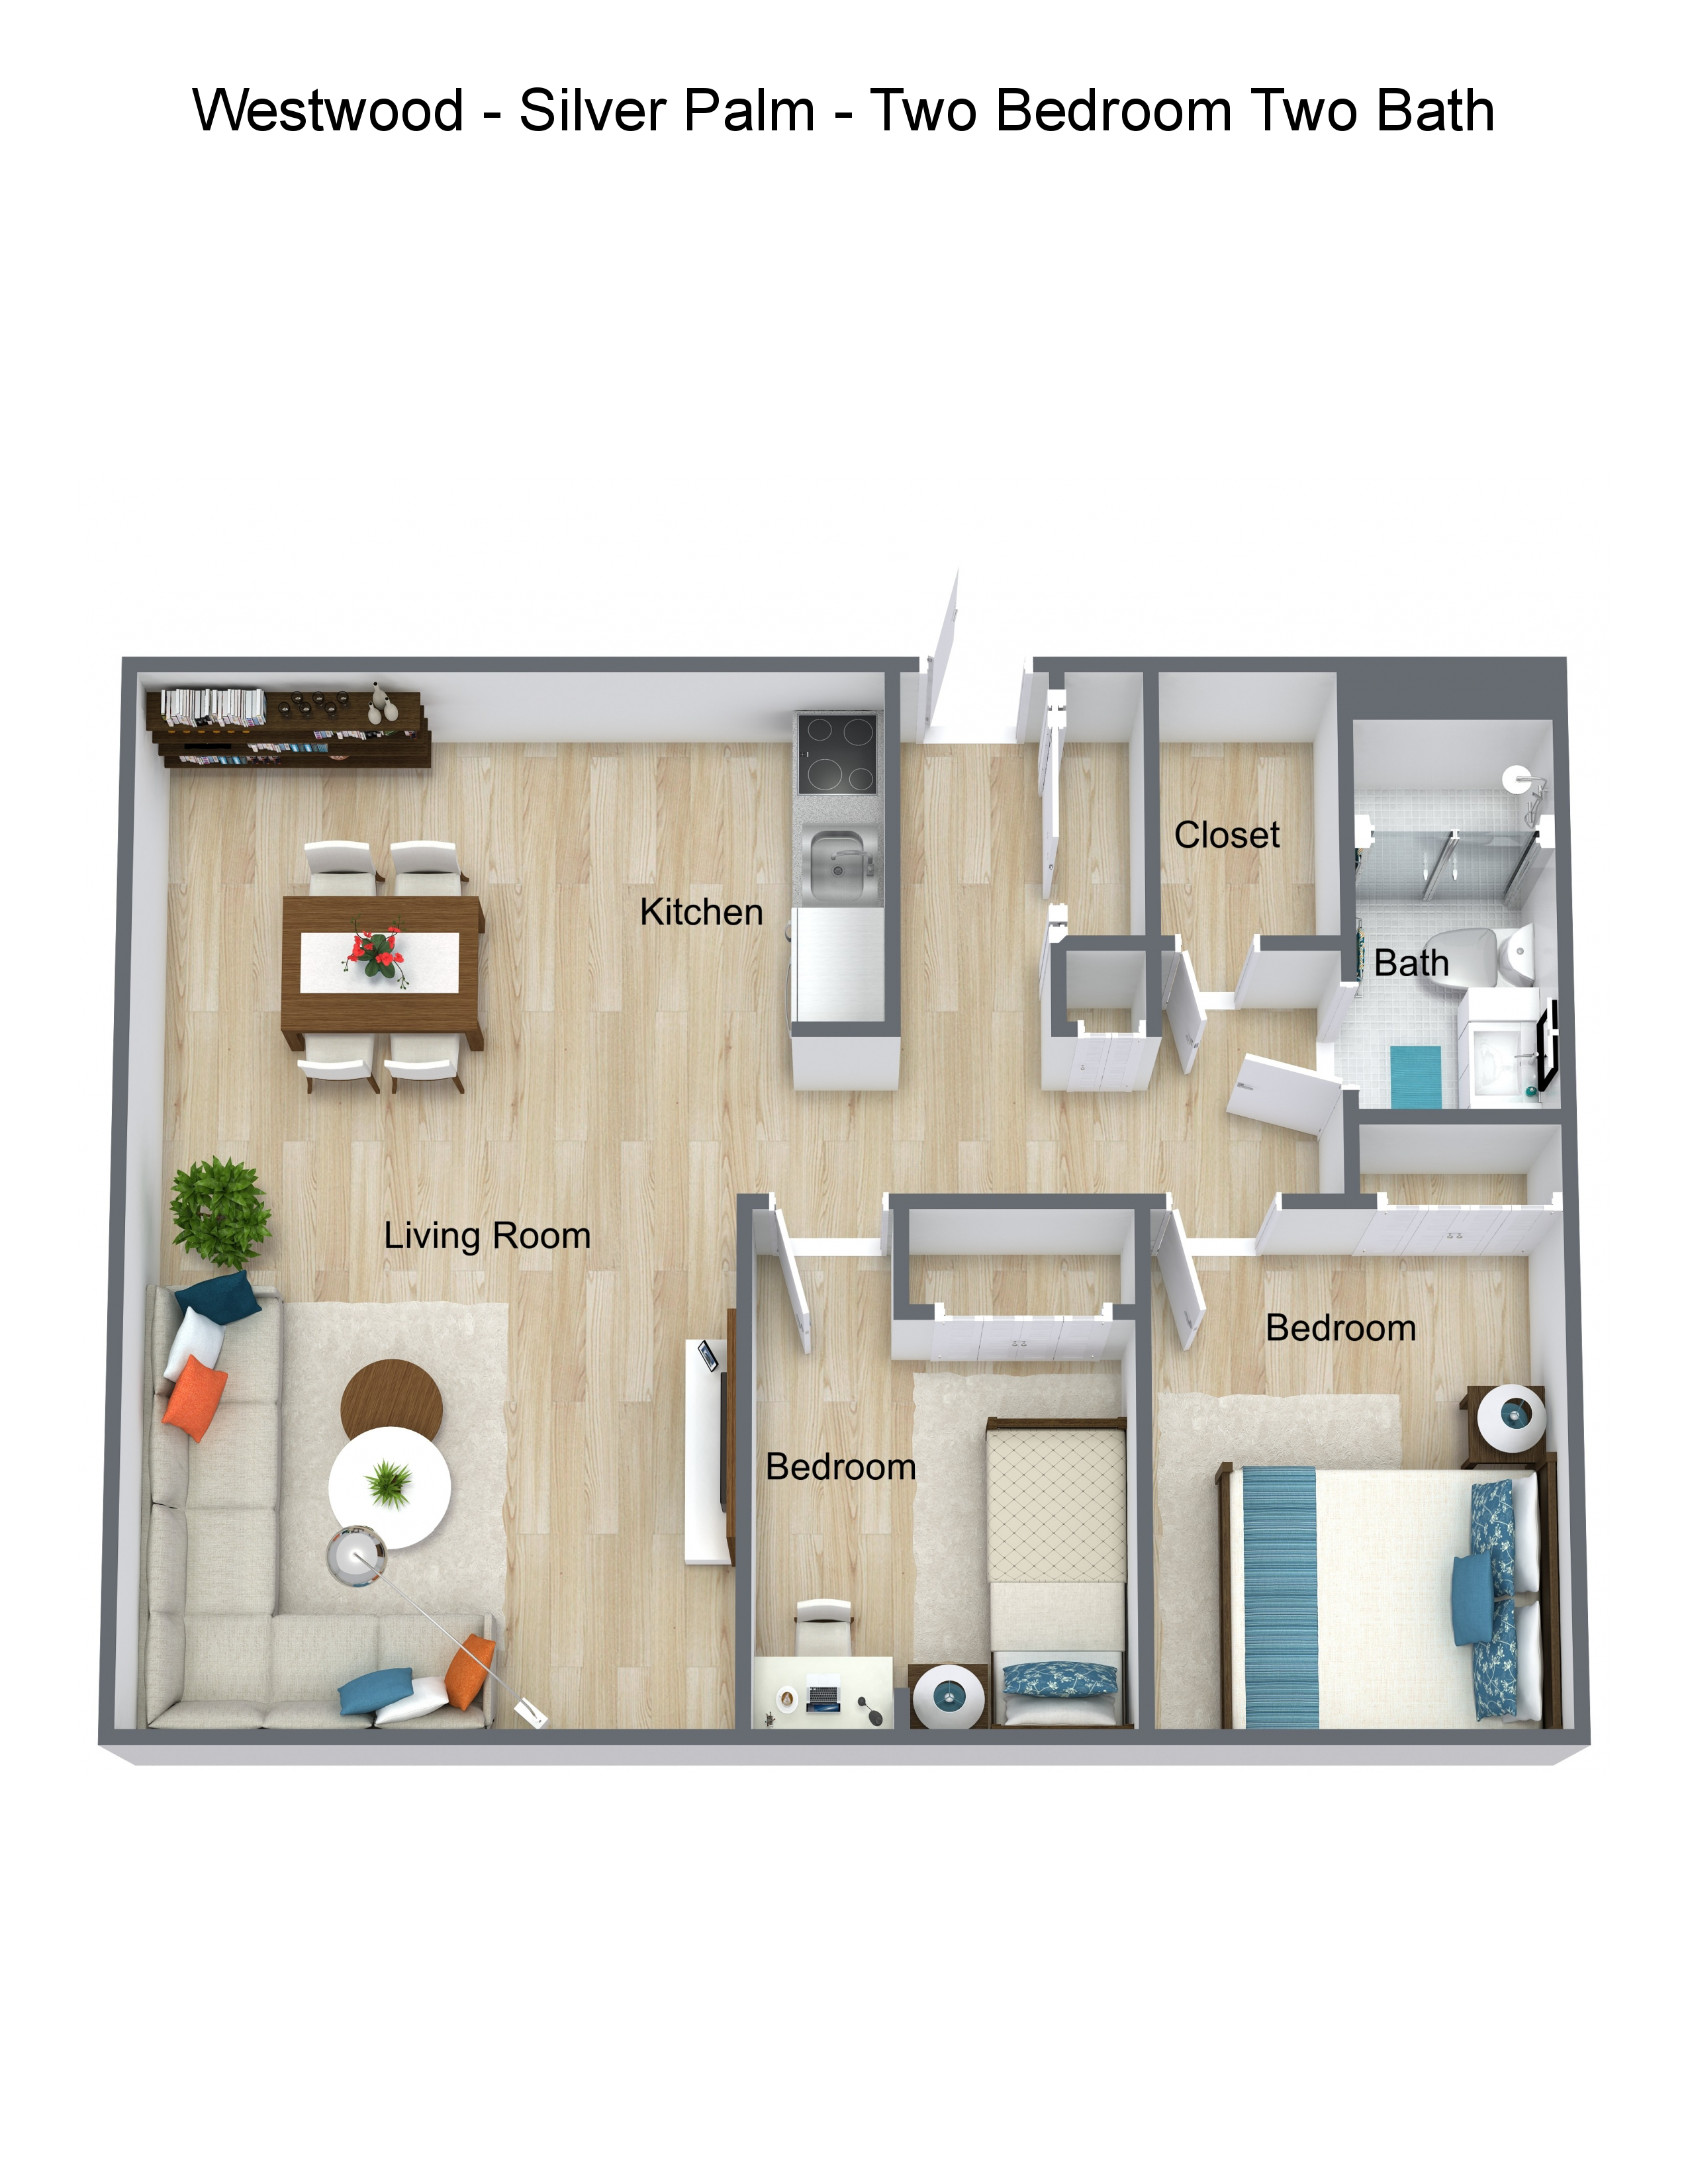 Westwood_-_Silver_Palm_-_Two_Bedroom_Two_Bath_mhas7n